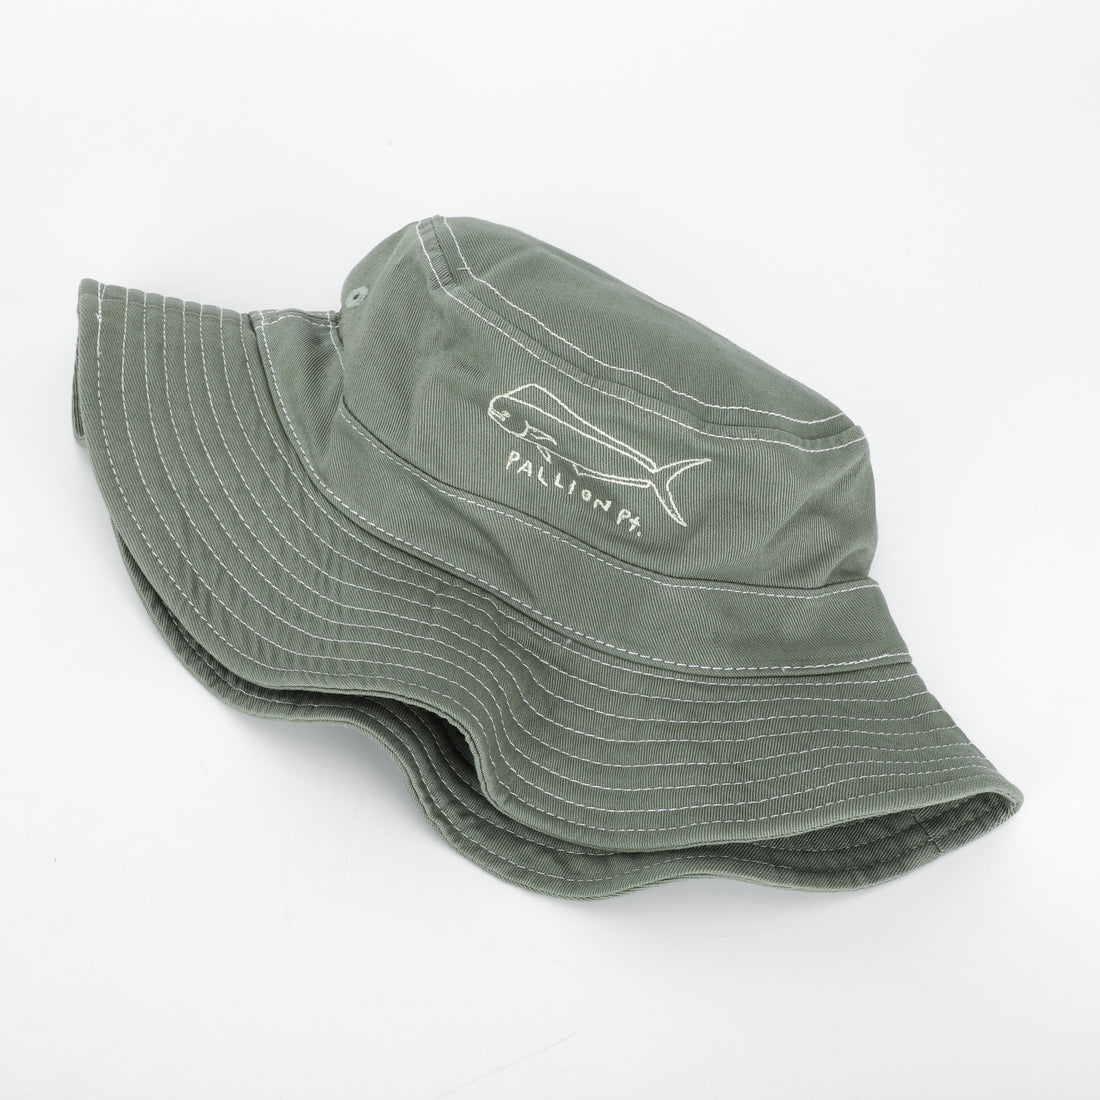 A mahi mahi fish outline embroidered on a sage green wide brim hat with white stitching.